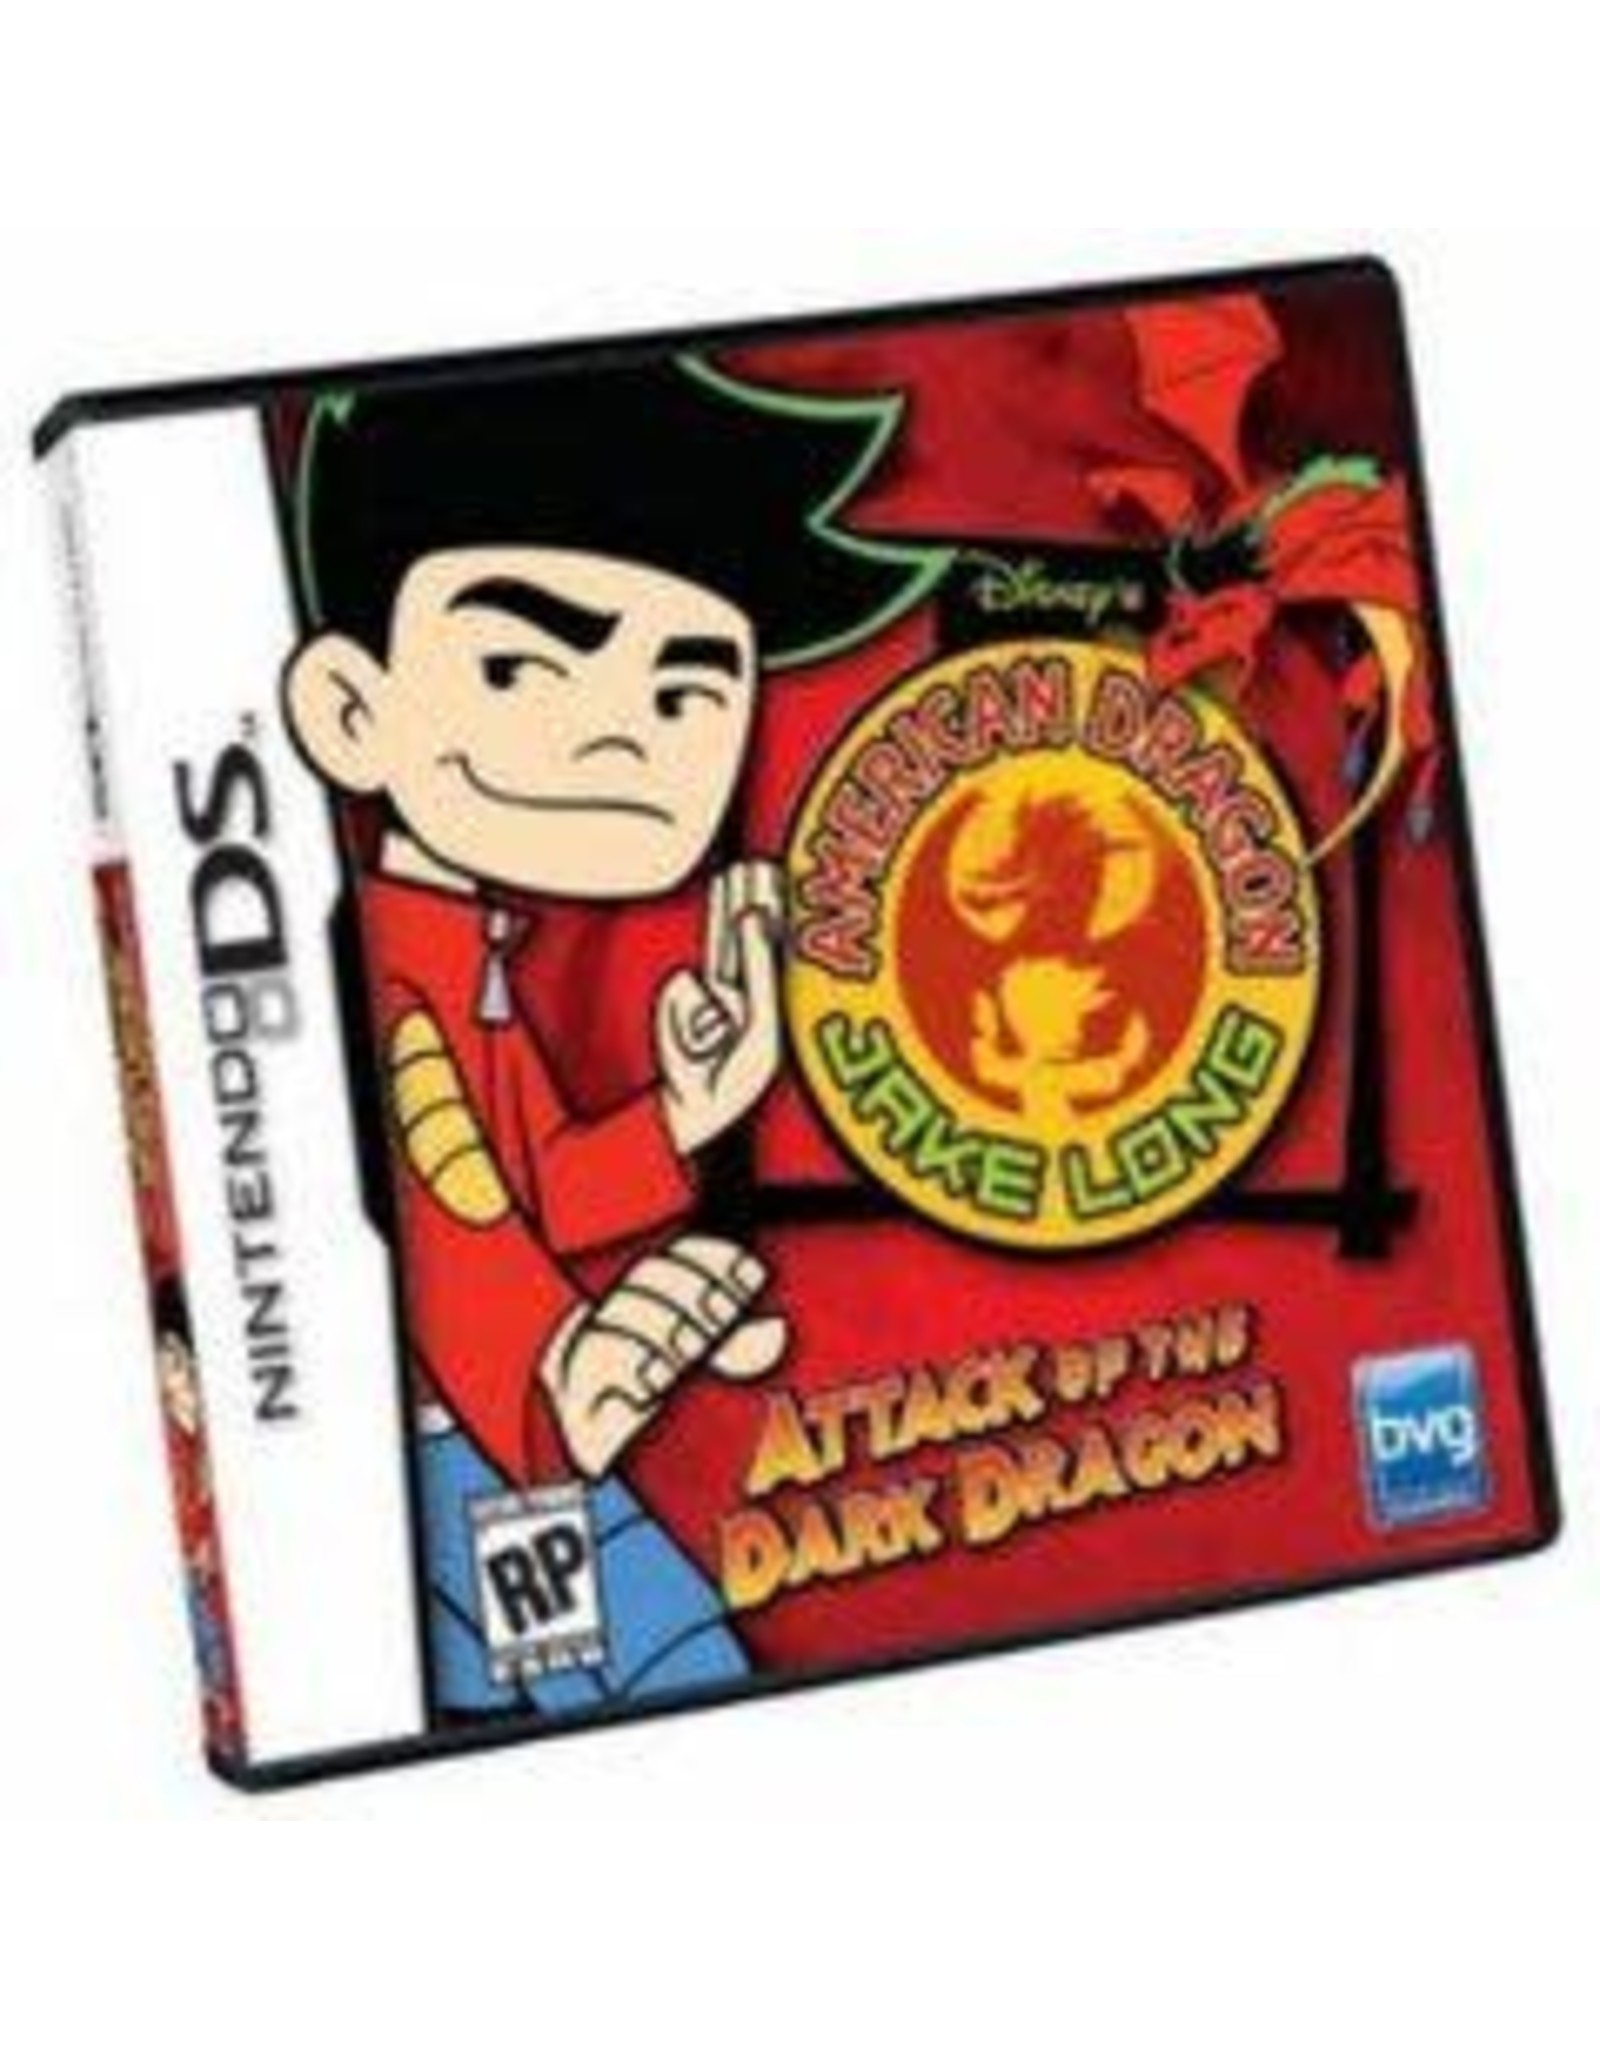 Nintendo DS American Dragon Jake Long Attack of the Dark Dragon (Cart Only)